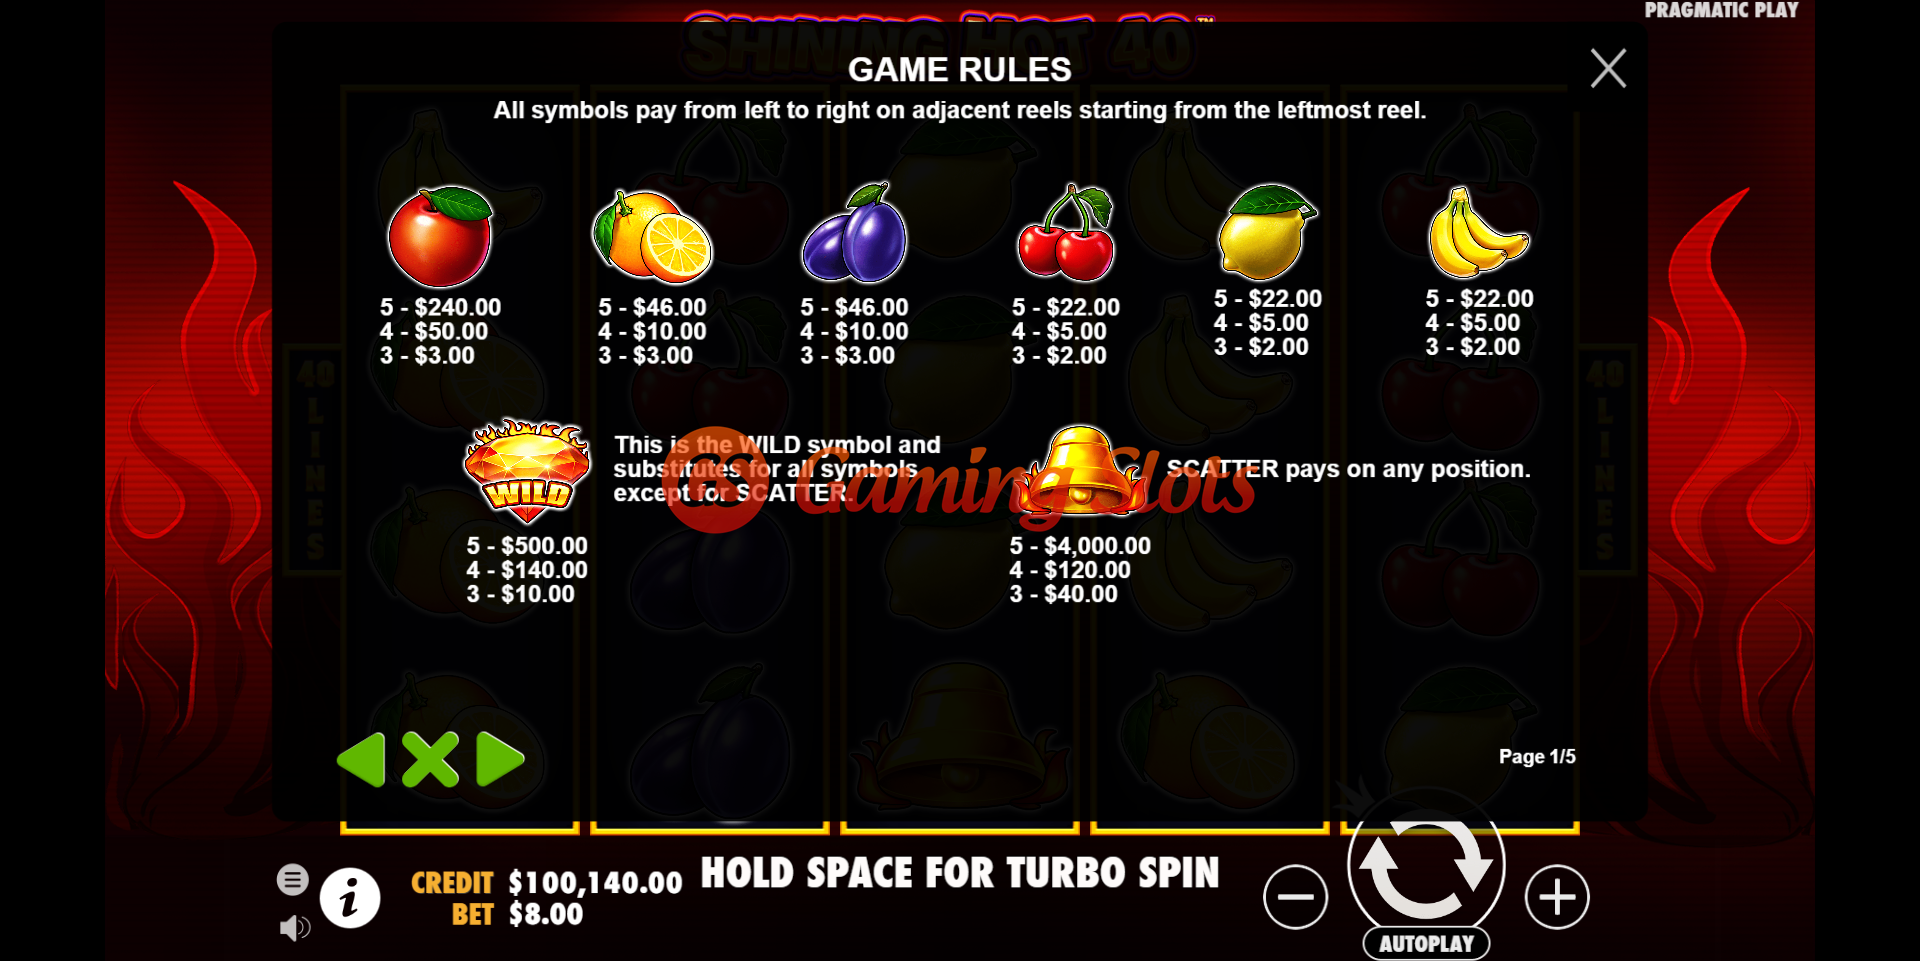 Game Rules for Shining Hot 40 slot from Pragmatic Play